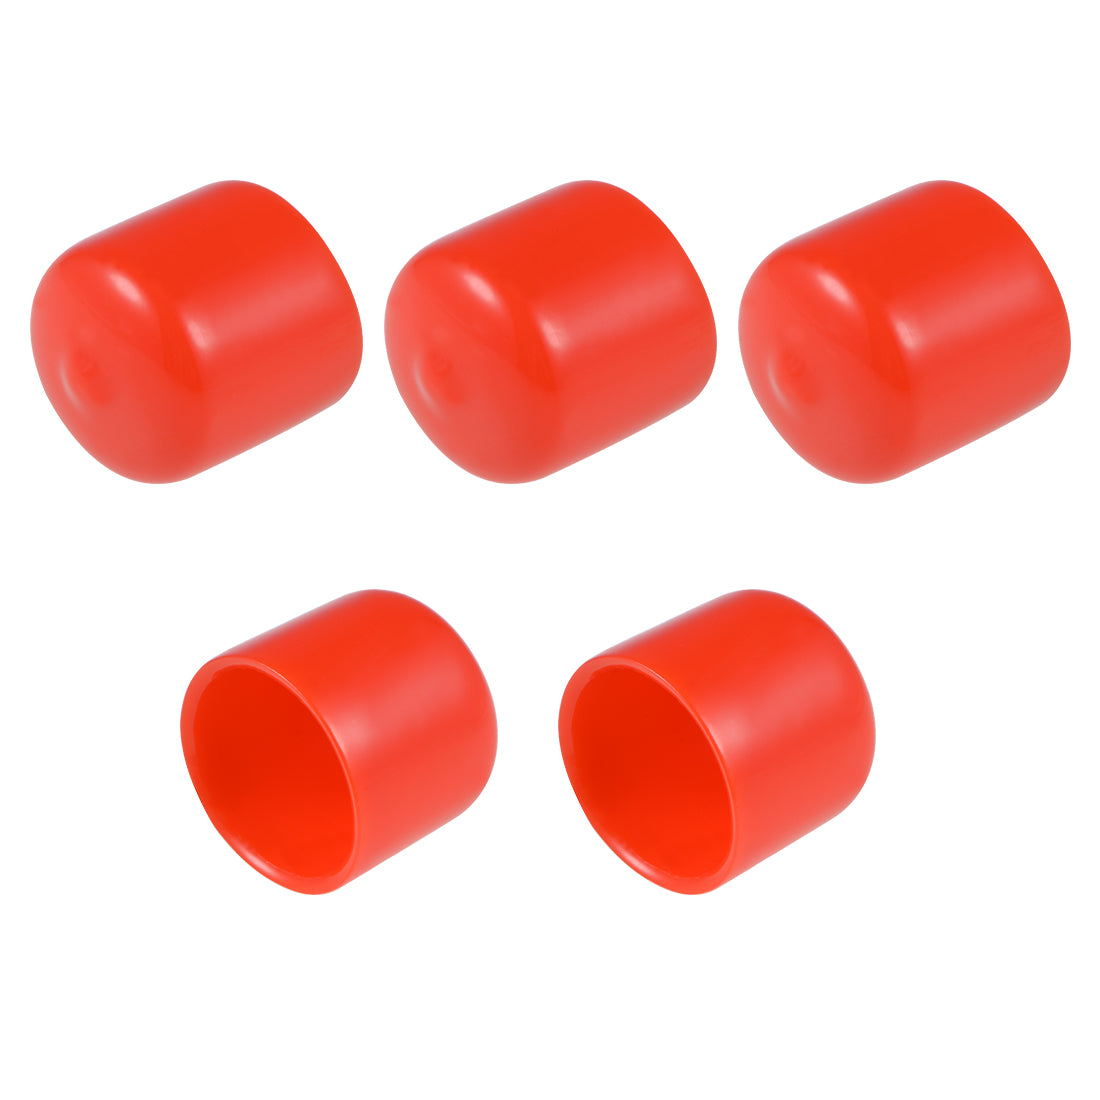 uxcell Uxcell Screw Thread Protector, 23mm ID Round End Cap Cover Red Tube Caps 5pcs